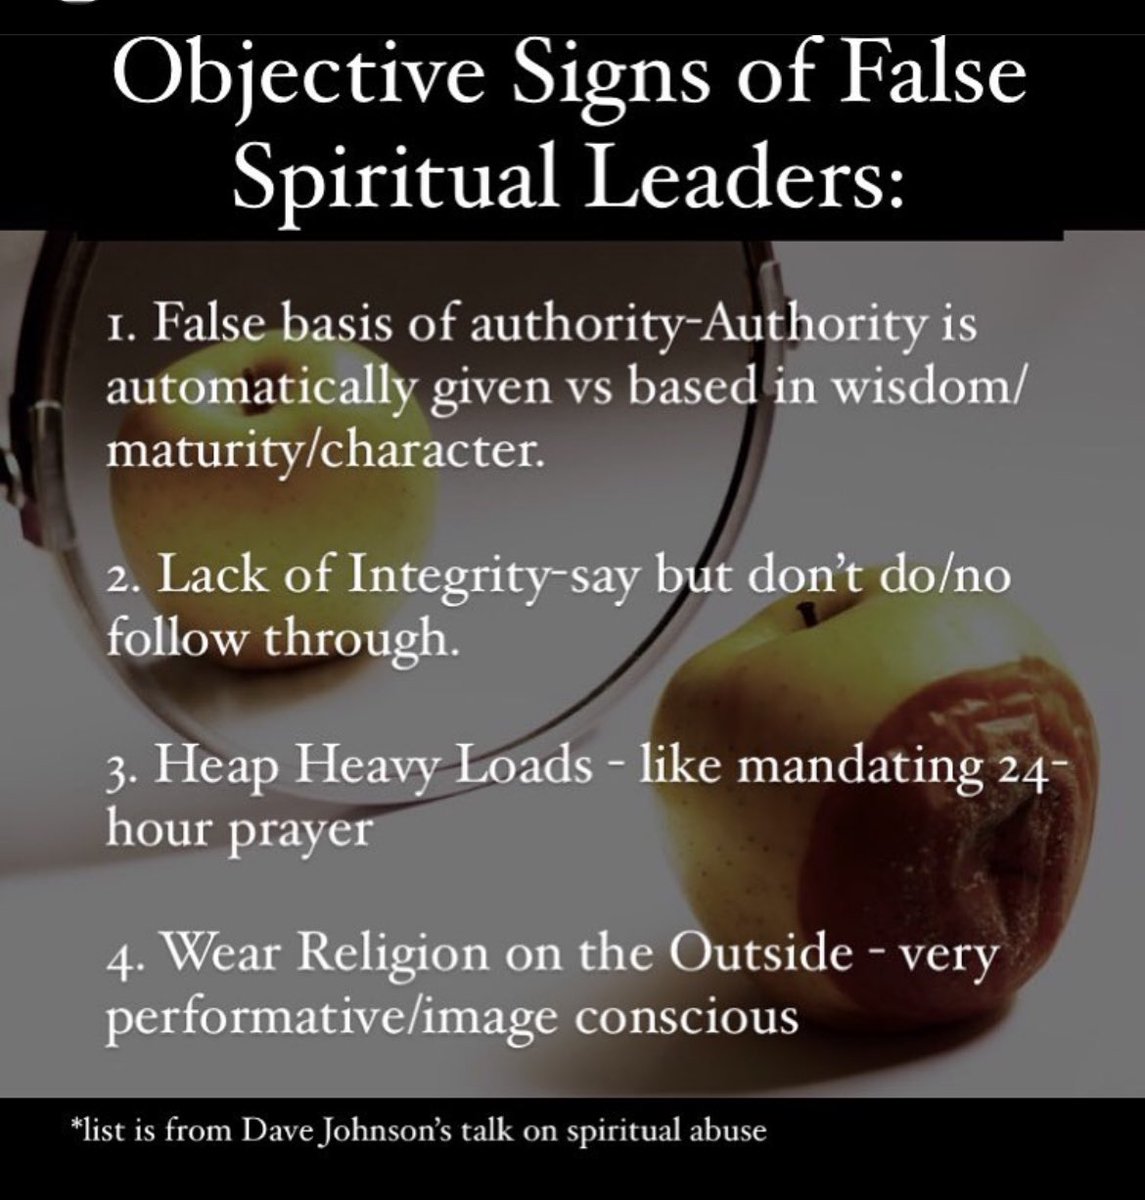 The features of an organization that *will* bear bad fruit according to Jeff VanVonderen & Dave Johnson. Unlike @mikebickle’s alleged abuse, this DOES predate the existence of @ihopkc 
Watch the full teaching here: nacr.org/center-for-spi…. #SpiritualAbuse #ihopkctoo